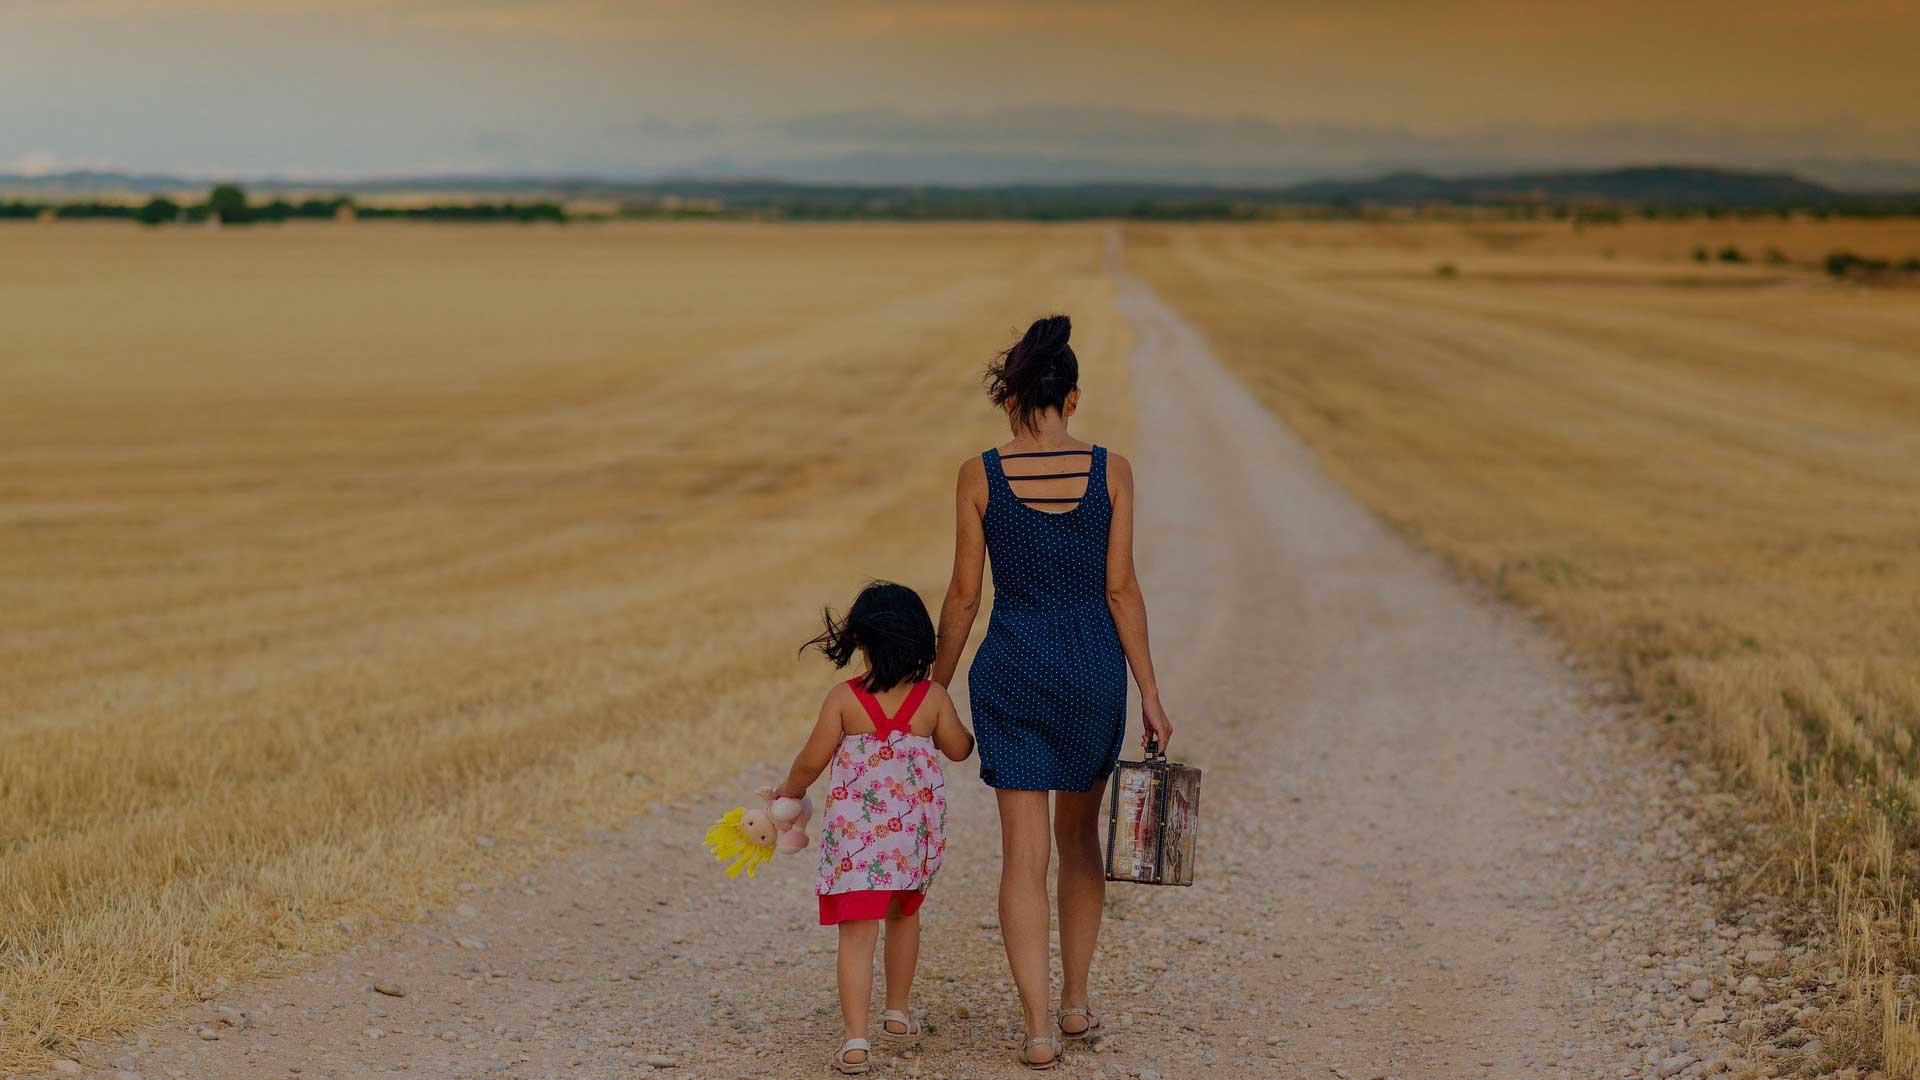 Woman and child walking down a dirt road